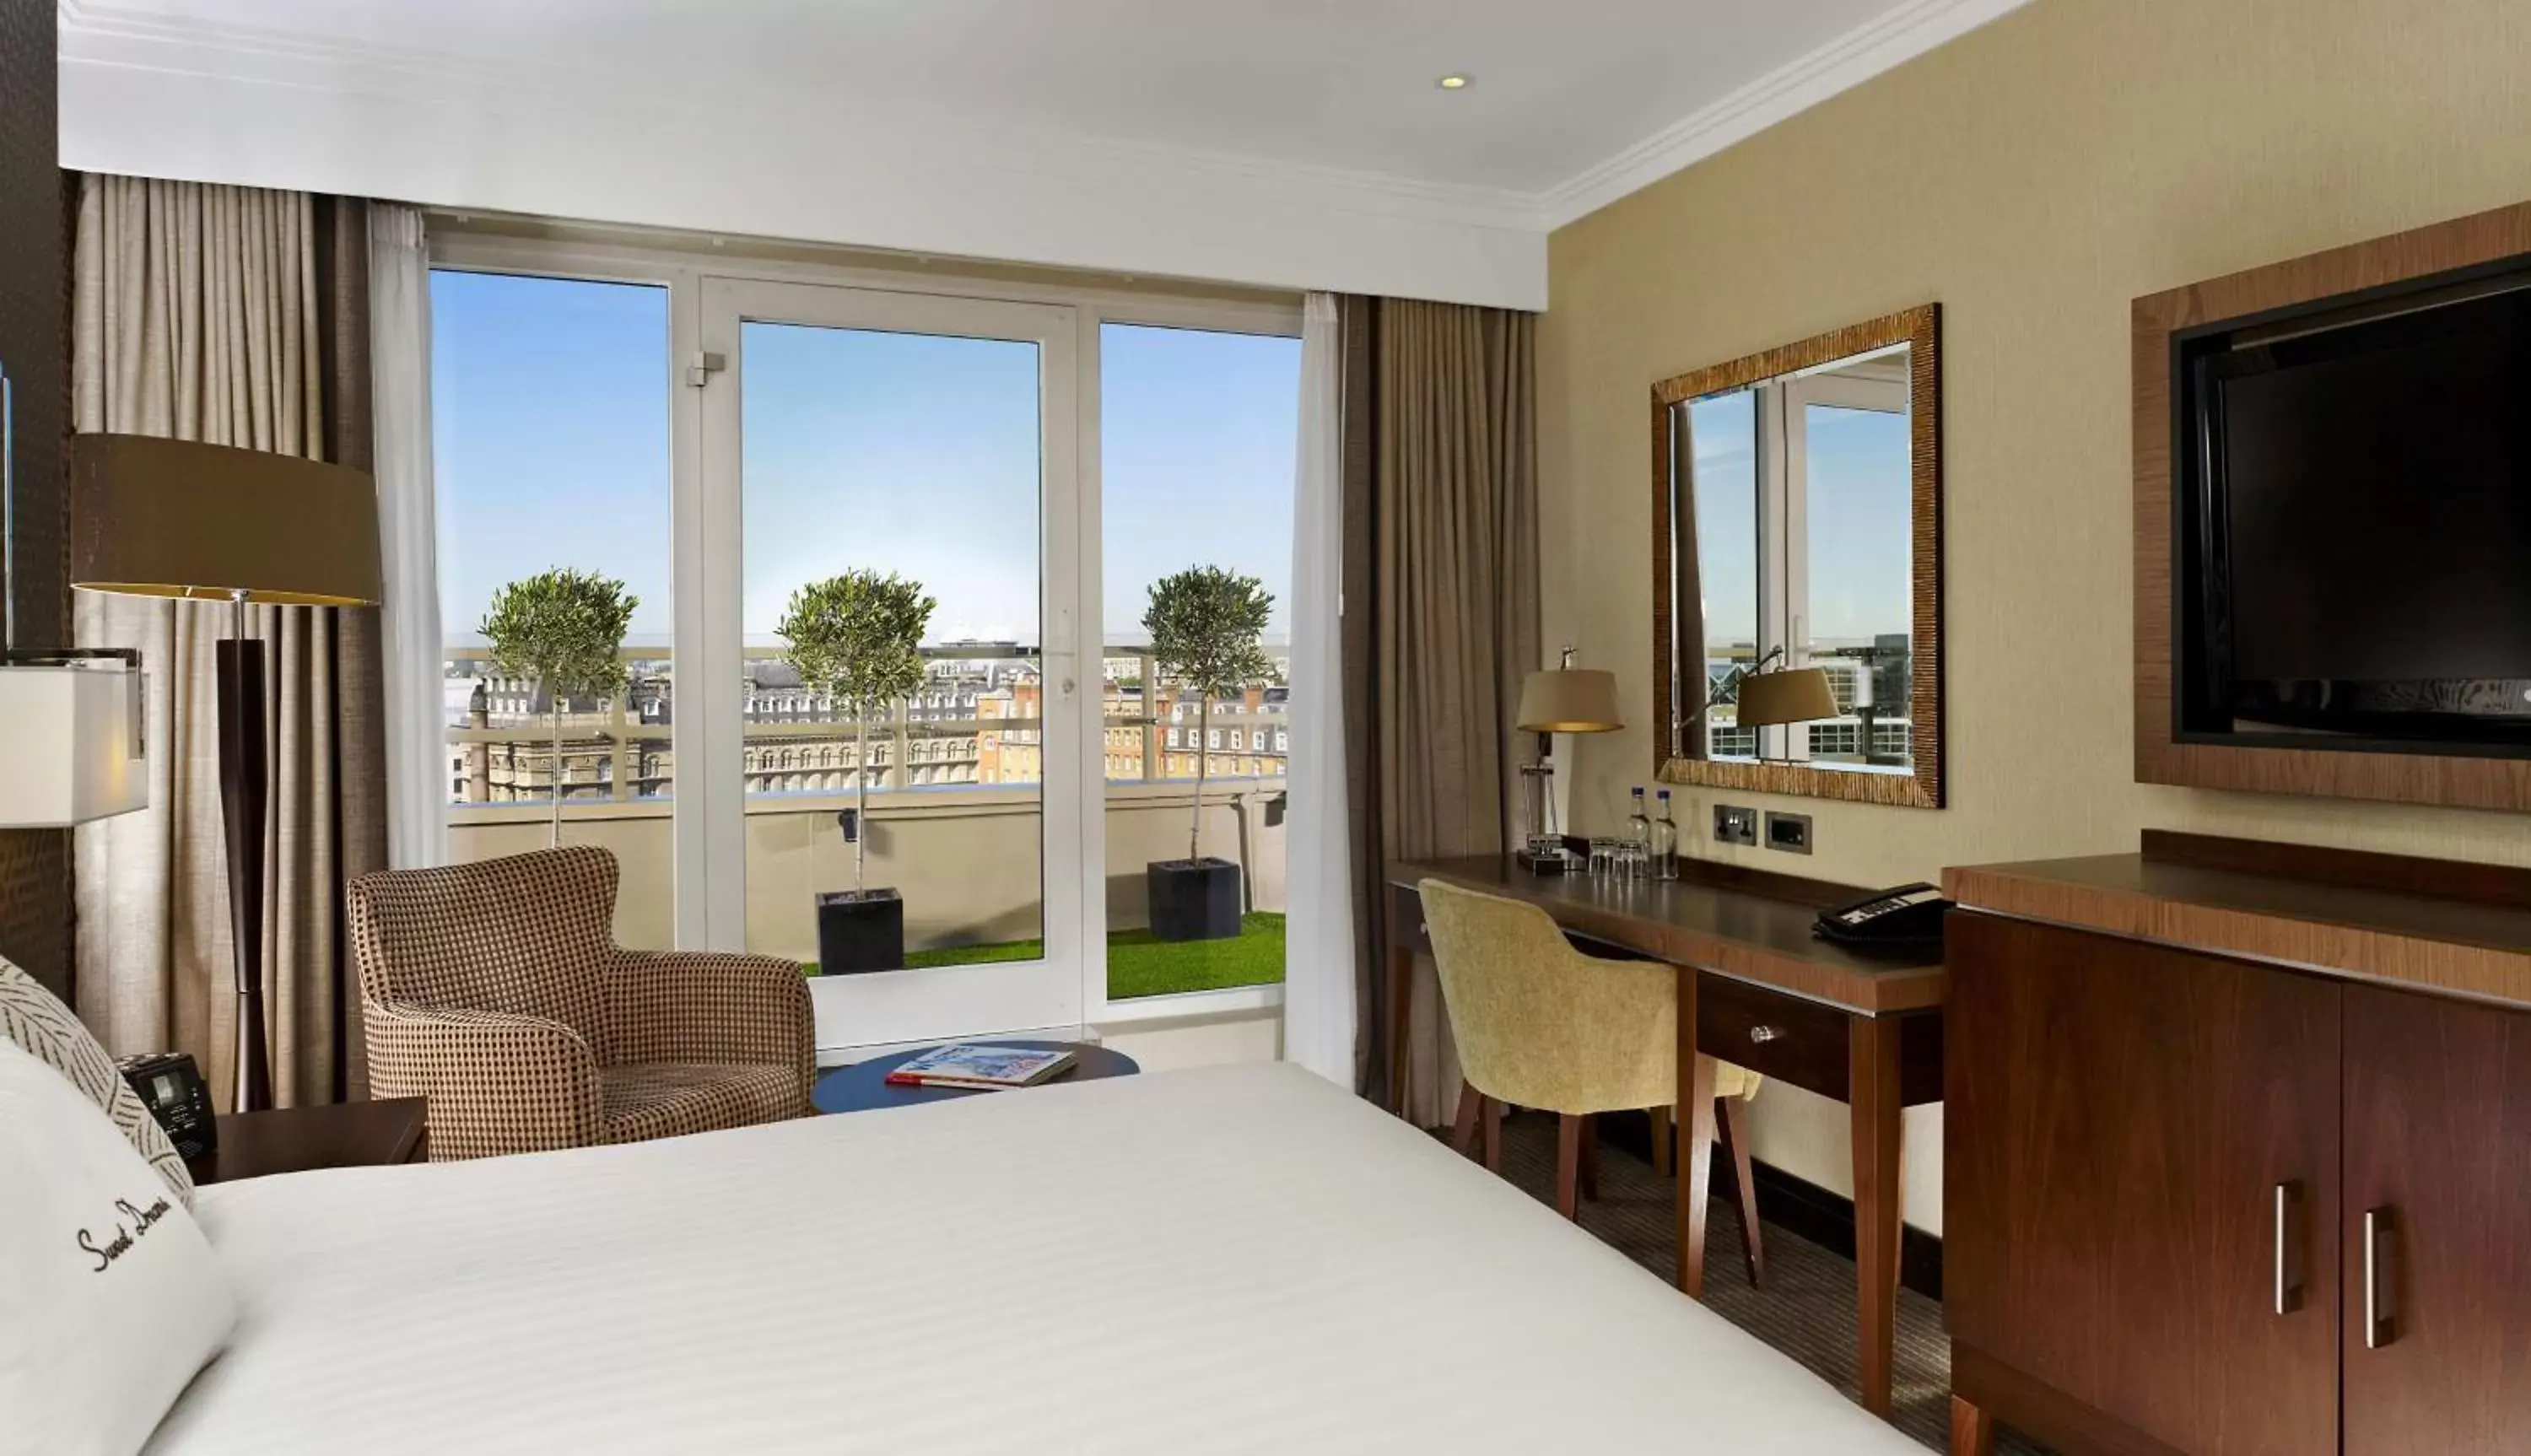 Bedroom in DoubleTree by Hilton London Victoria